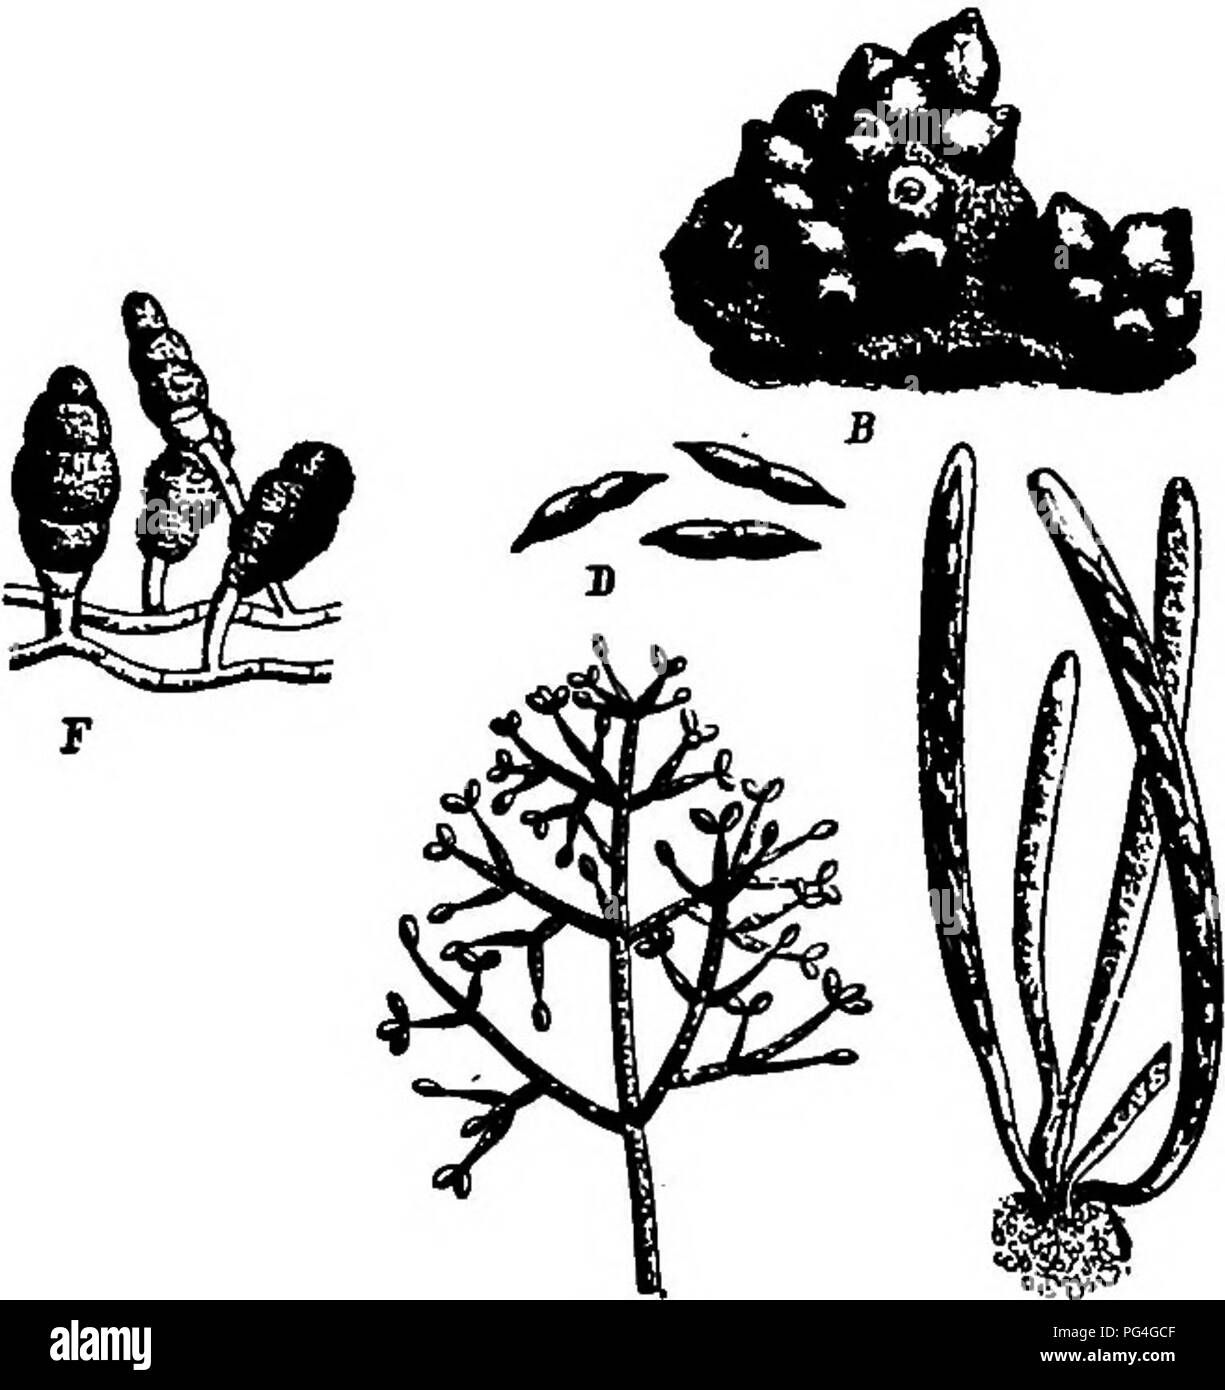 . The fungi which cause plant disease . Plant diseases; Fungi. 200 THE FUNGI WHICH CAUSE PLANT DISEASE Hypomyces Fries (p. 197) Stroma an effused cottony subicnlvun, often of considerable extent; perithecia numerous, usually thickly scattered and im- mersed in the subiculum, rarely superficial; asci cylindric, 8-spored; spores fusoid or fusiform, usually apiculate, rarely blunt, 2-celled, hyaline; conidial phase variable. This genus of some forty species contains but few &gt; saprophytes, the majority being parasitic, chiefly on the larger fimgi. The genus is of economic interest only as affec Stock Photo